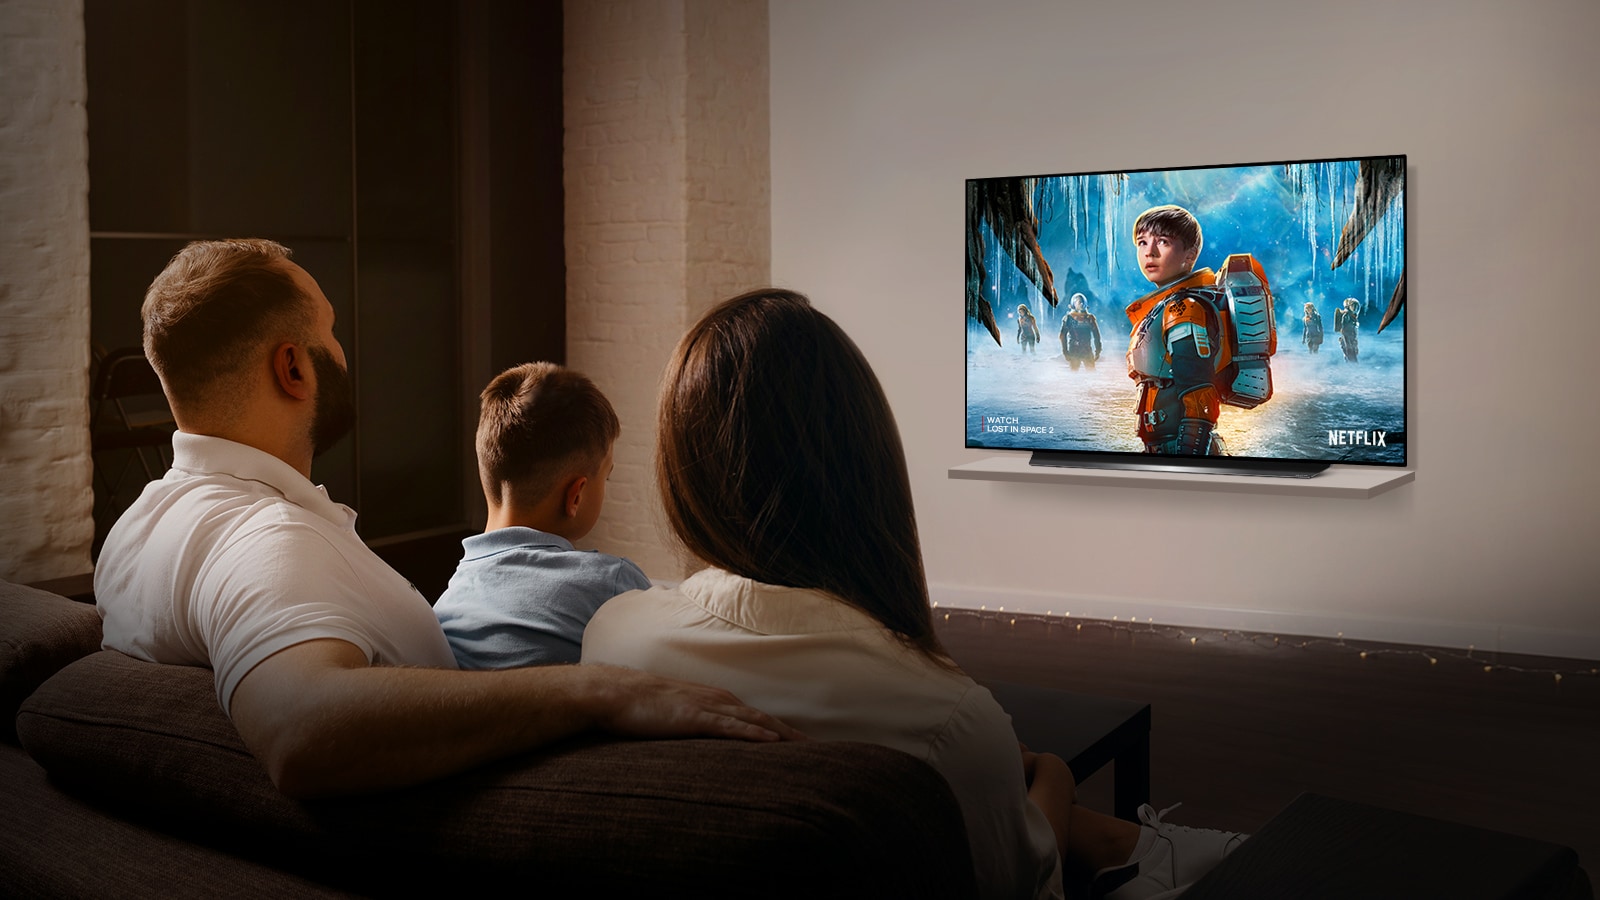 OLED makes home the best movie theatre<br>1